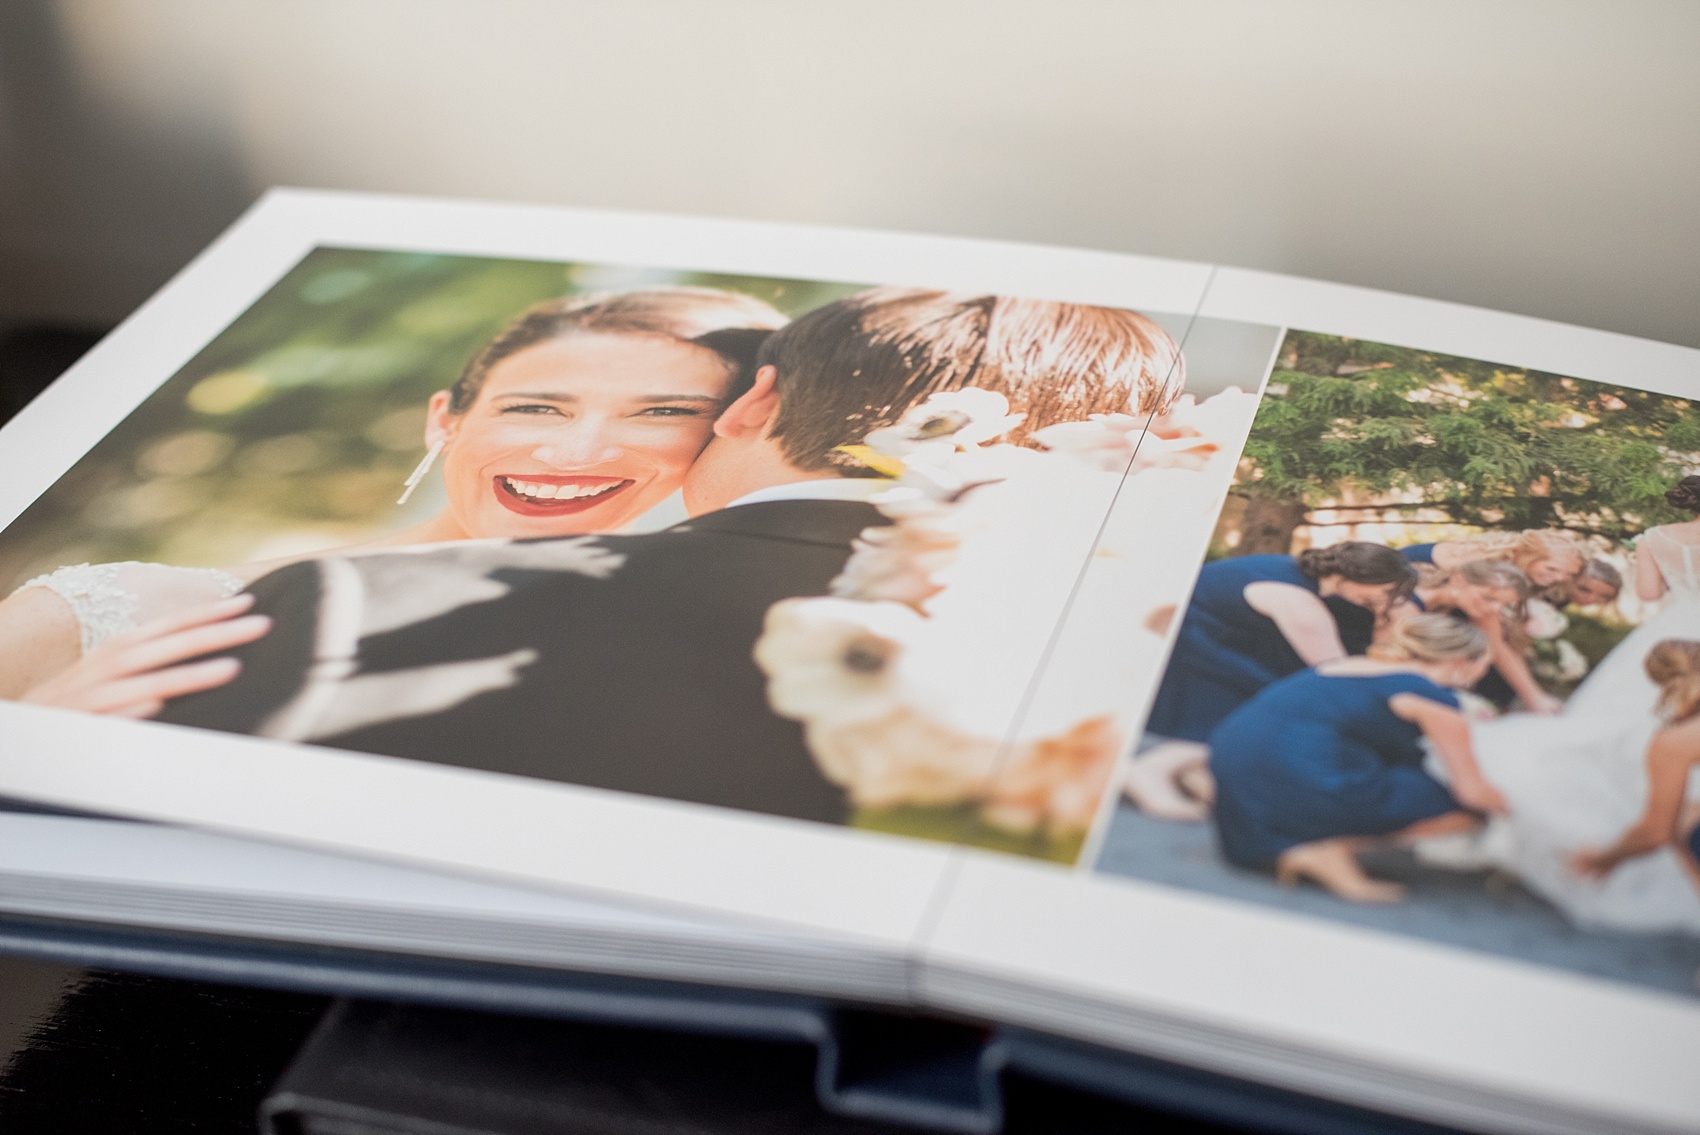 Mikkel Paige Photography photos of a Madera wedding album in navy blue leather. This fine art family heirloom is 12x12" with debossing on the spine. 